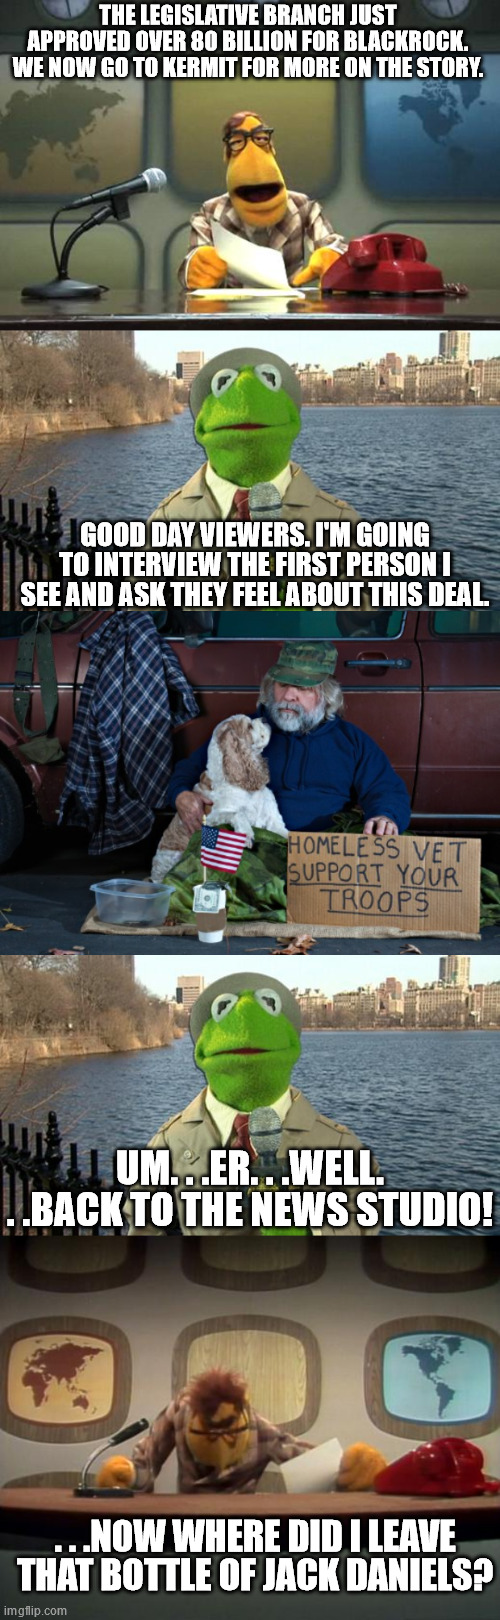 If you have 80 billion dollars you can practically help all the homeless vets. . .OR- | THE LEGISLATIVE BRANCH JUST APPROVED OVER 80 BILLION FOR BLACKROCK. WE NOW GO TO KERMIT FOR MORE ON THE STORY. GOOD DAY VIEWERS. I'M GOING TO INTERVIEW THE FIRST PERSON I SEE AND ASK THEY FEEL ABOUT THIS DEAL. UM. . .ER. . .WELL. . .BACK TO THE NEWS STUDIO! . . .NOW WHERE DID I LEAVE THAT BOTTLE OF JACK DANIELS? | image tagged in muppet news flash,kermit news report,homeless vet,muppet news 2,government corruption | made w/ Imgflip meme maker